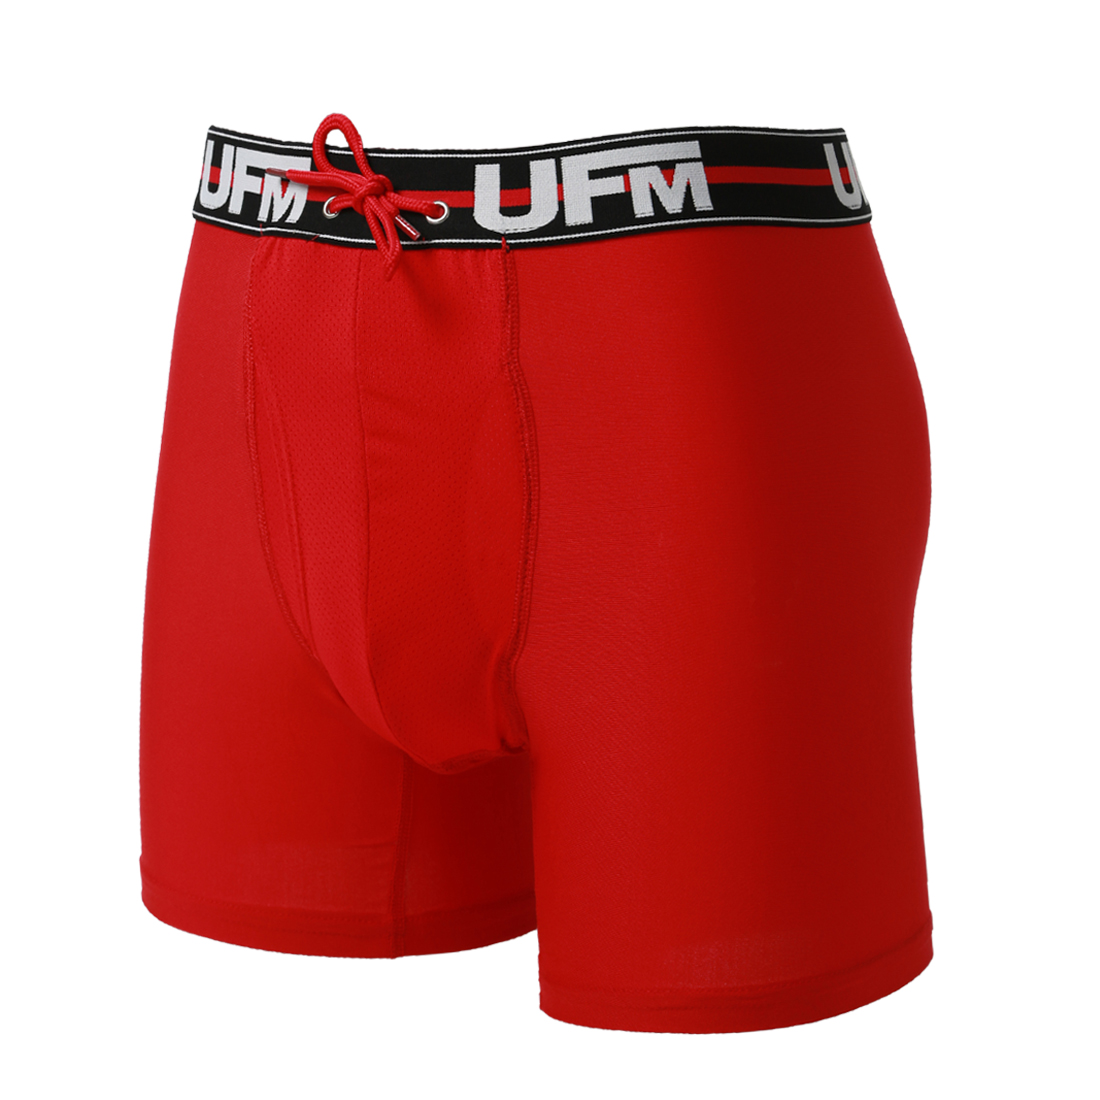 Athletic Underwear, Big and Tall Boxer Briefs